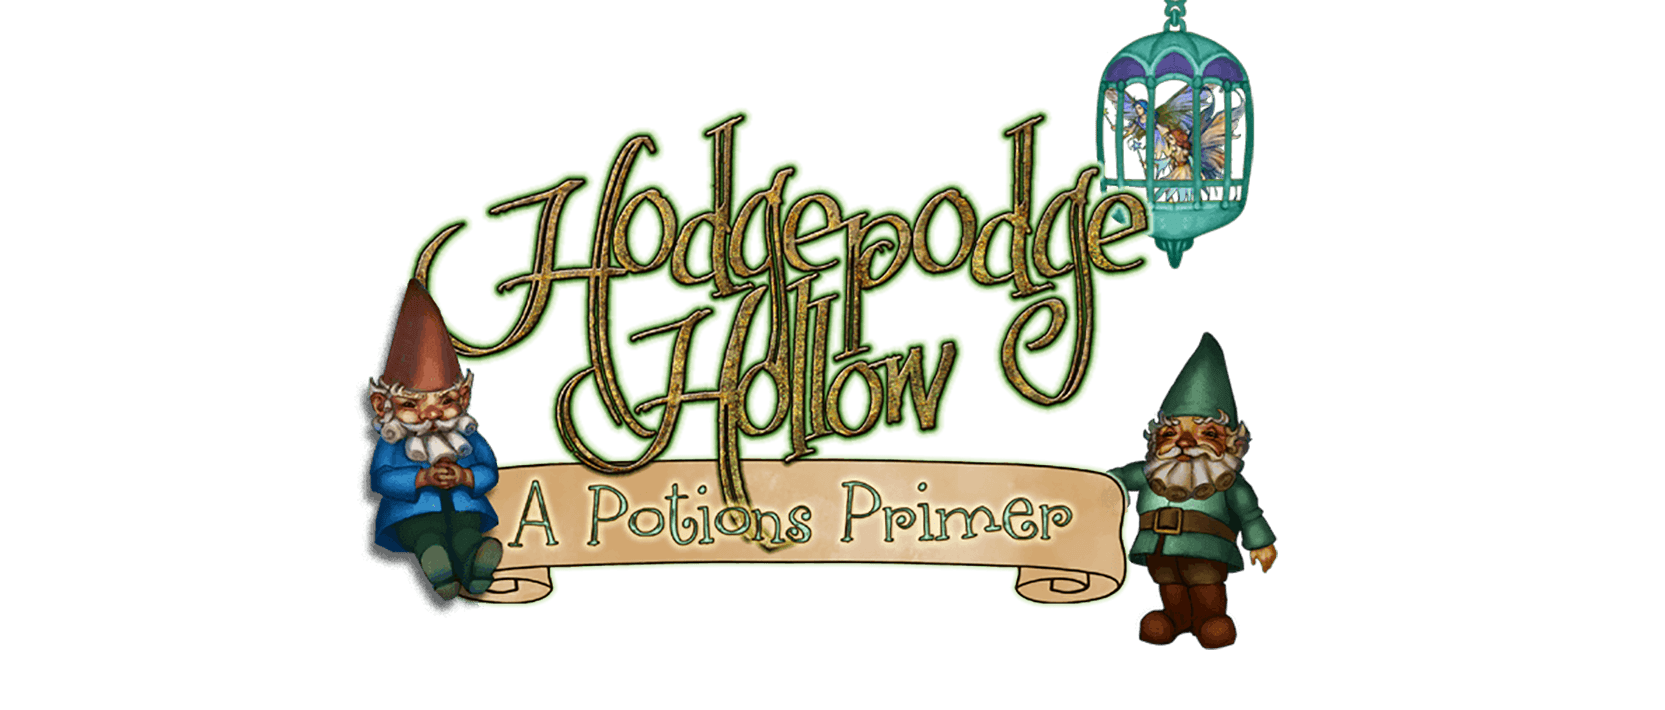 Hodgepodge Hollow